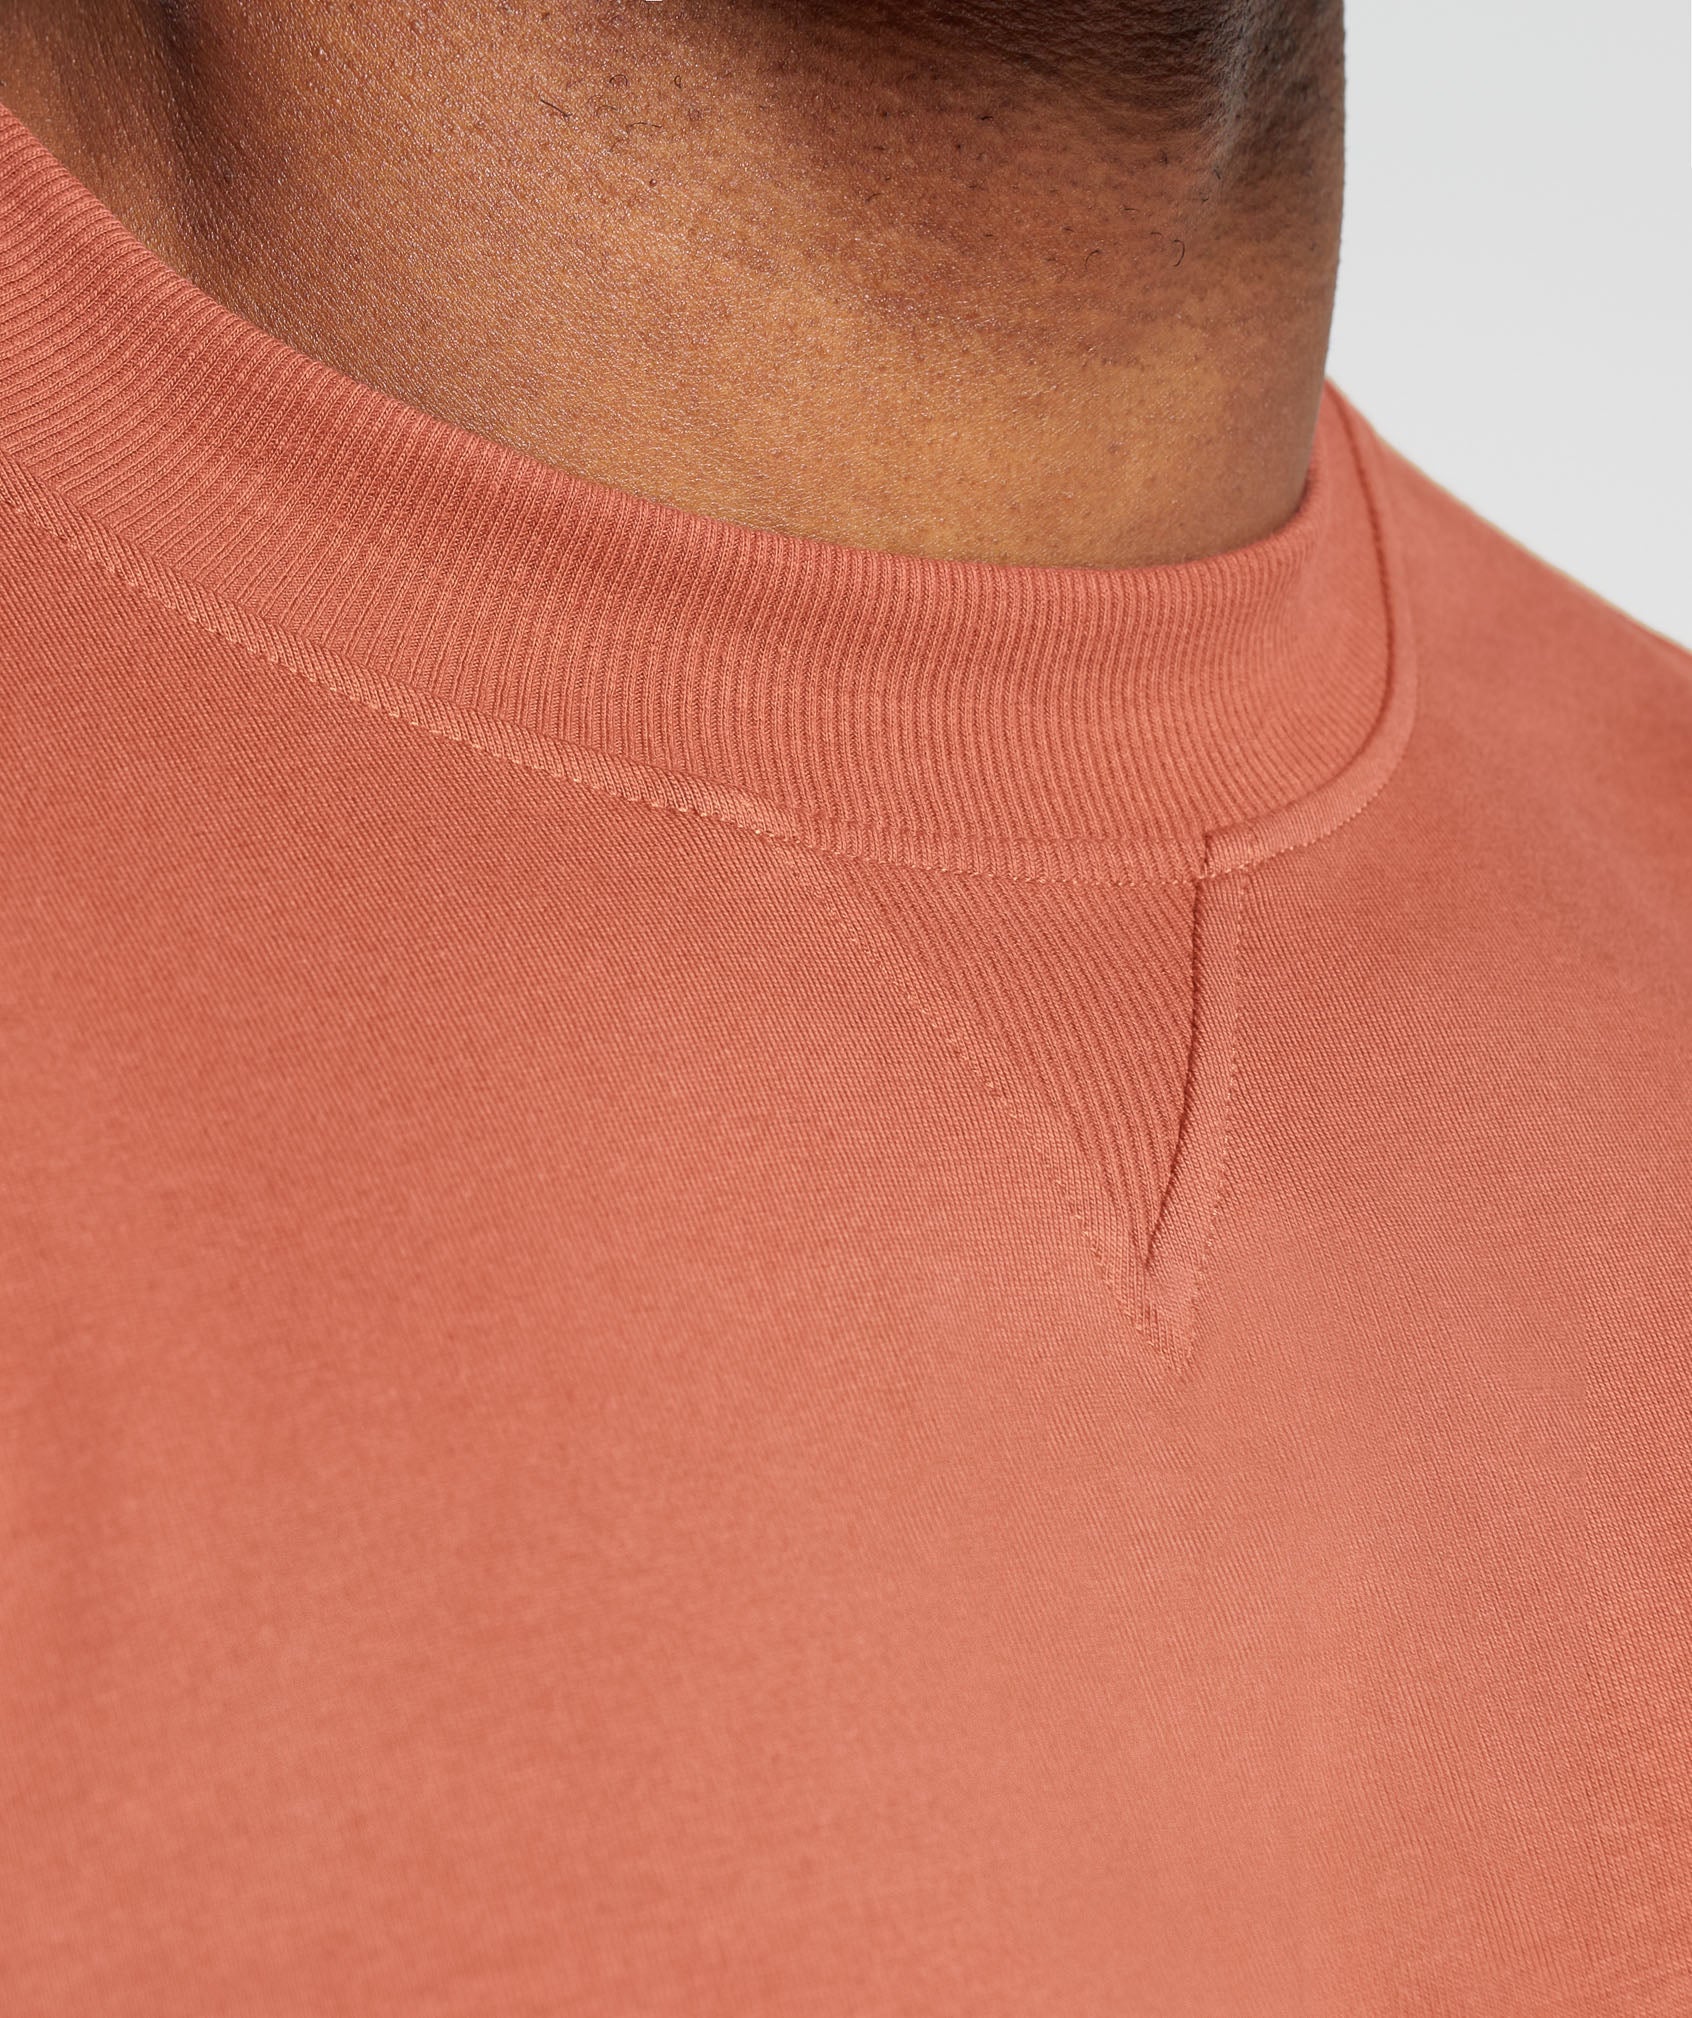 Rest Day Essentials T-Shirt in Persimmon Red